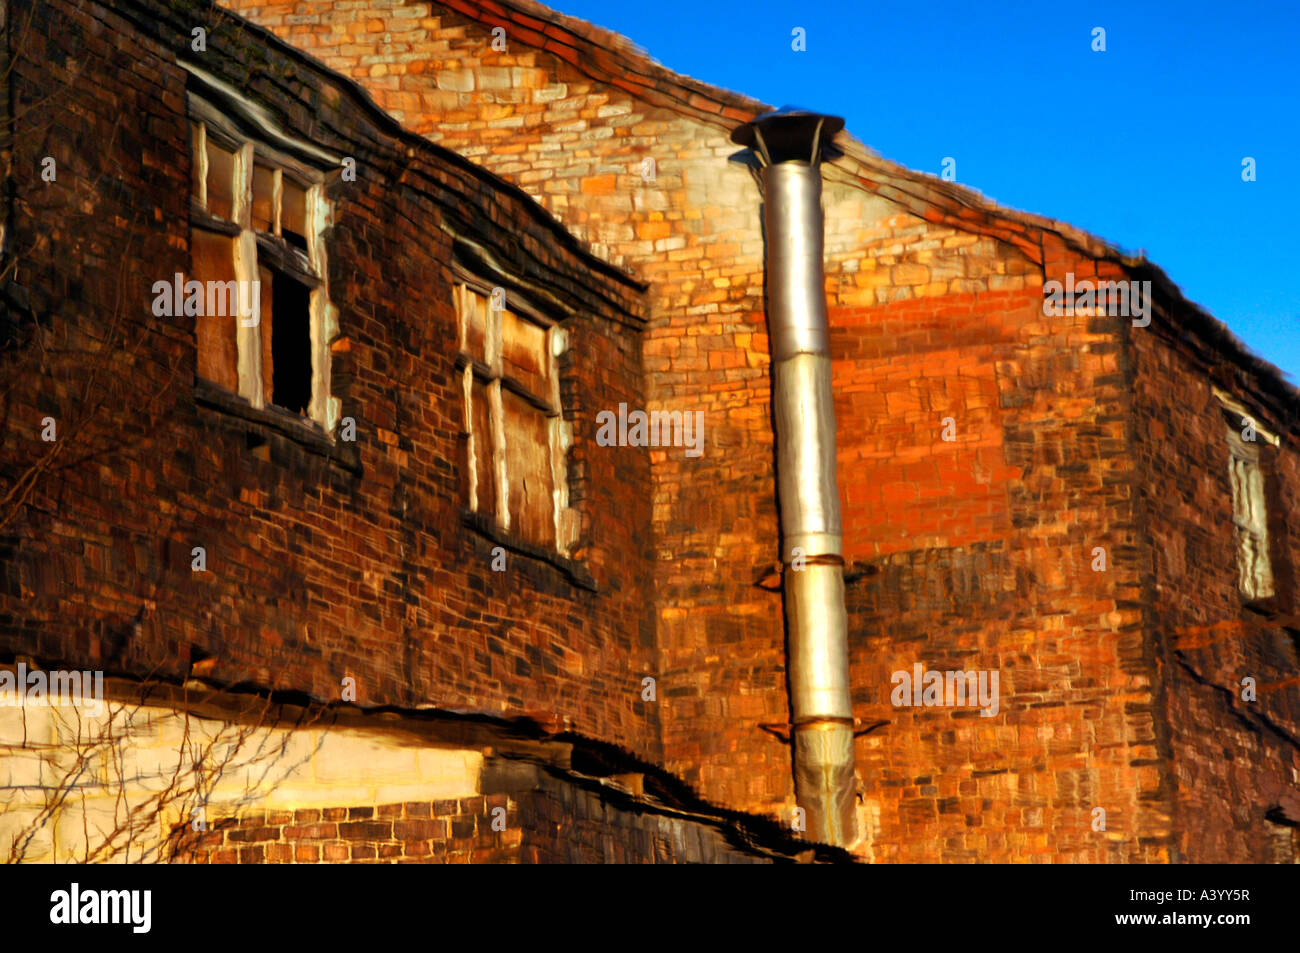 Disused Factory Buildings. Stock Photo